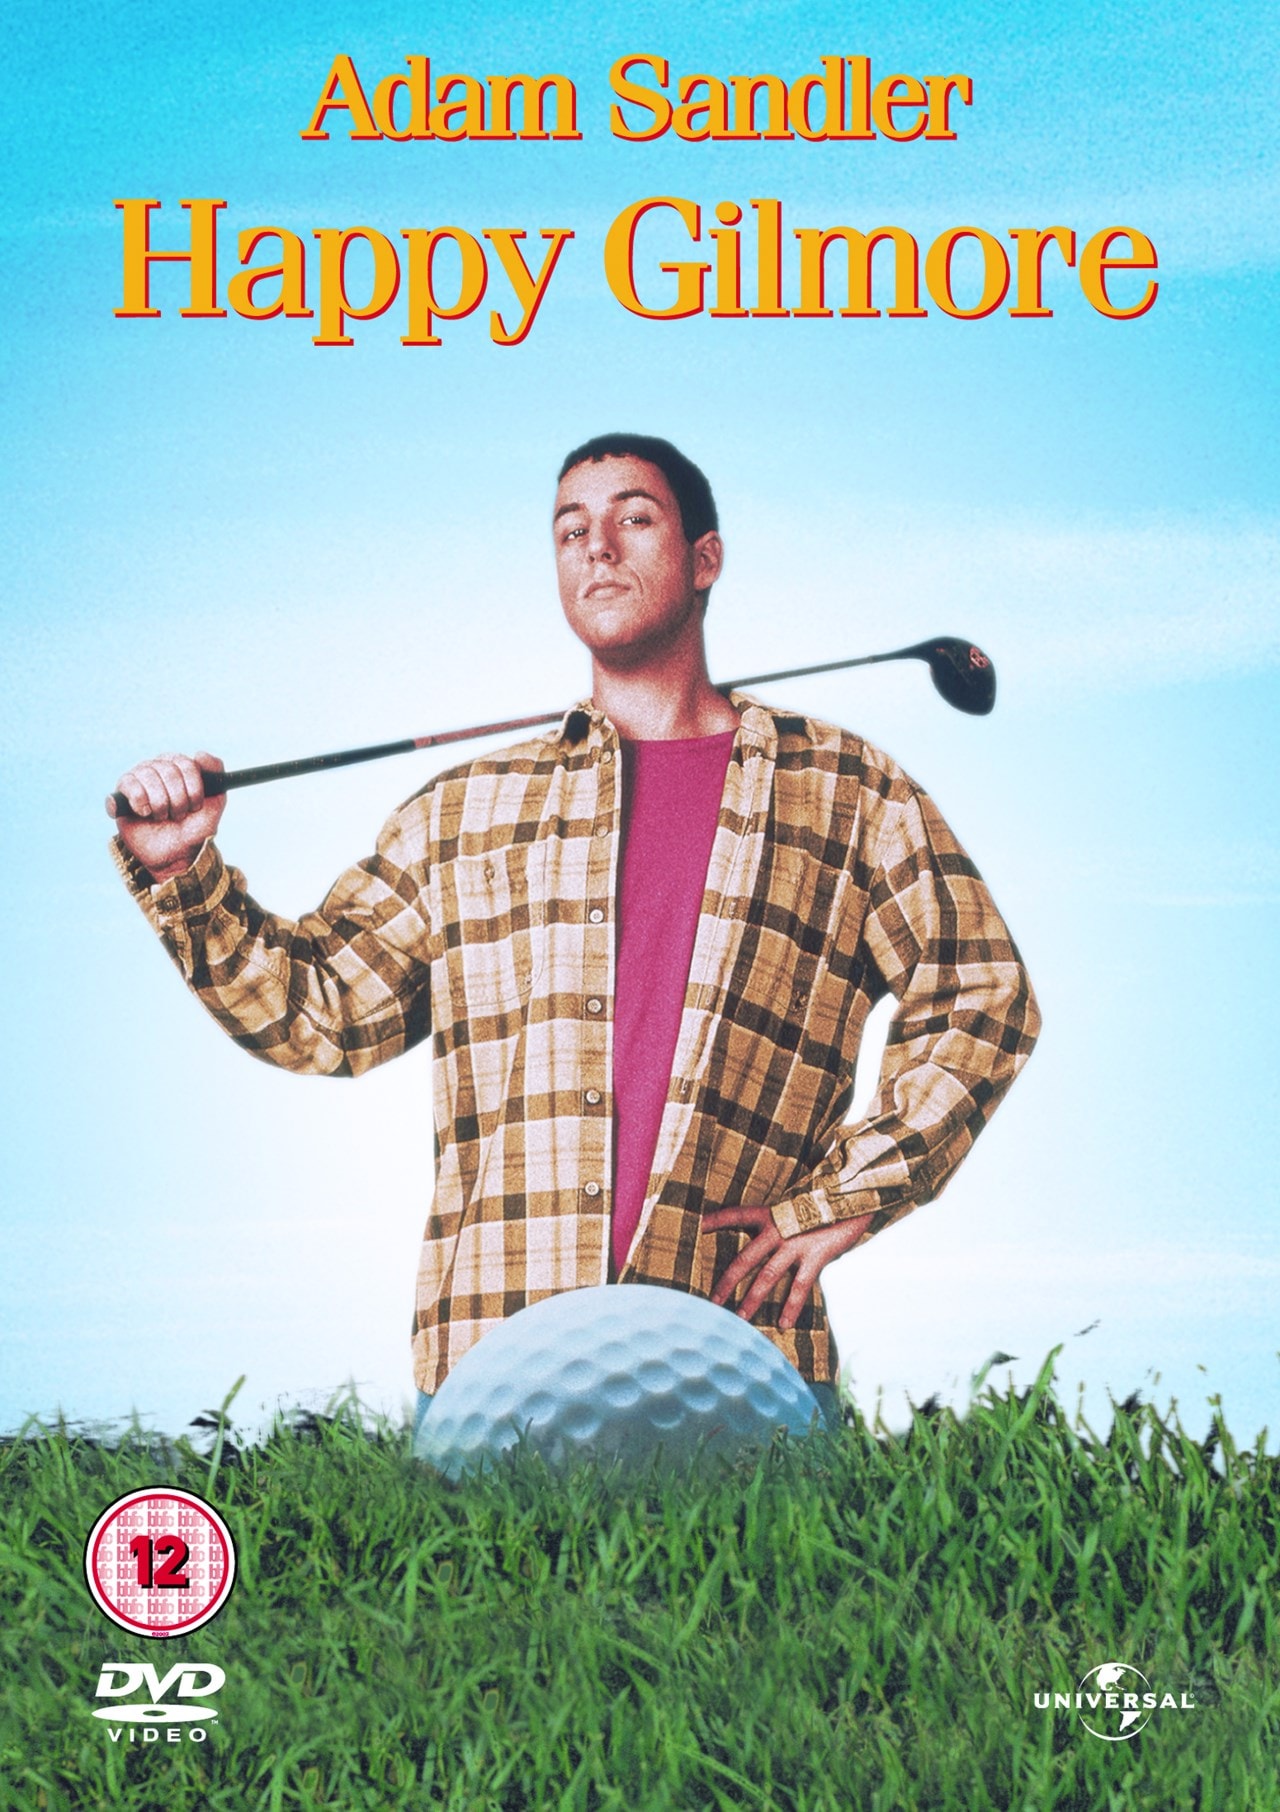 Happy Gilmore DVD Free shipping over £20 HMV Store